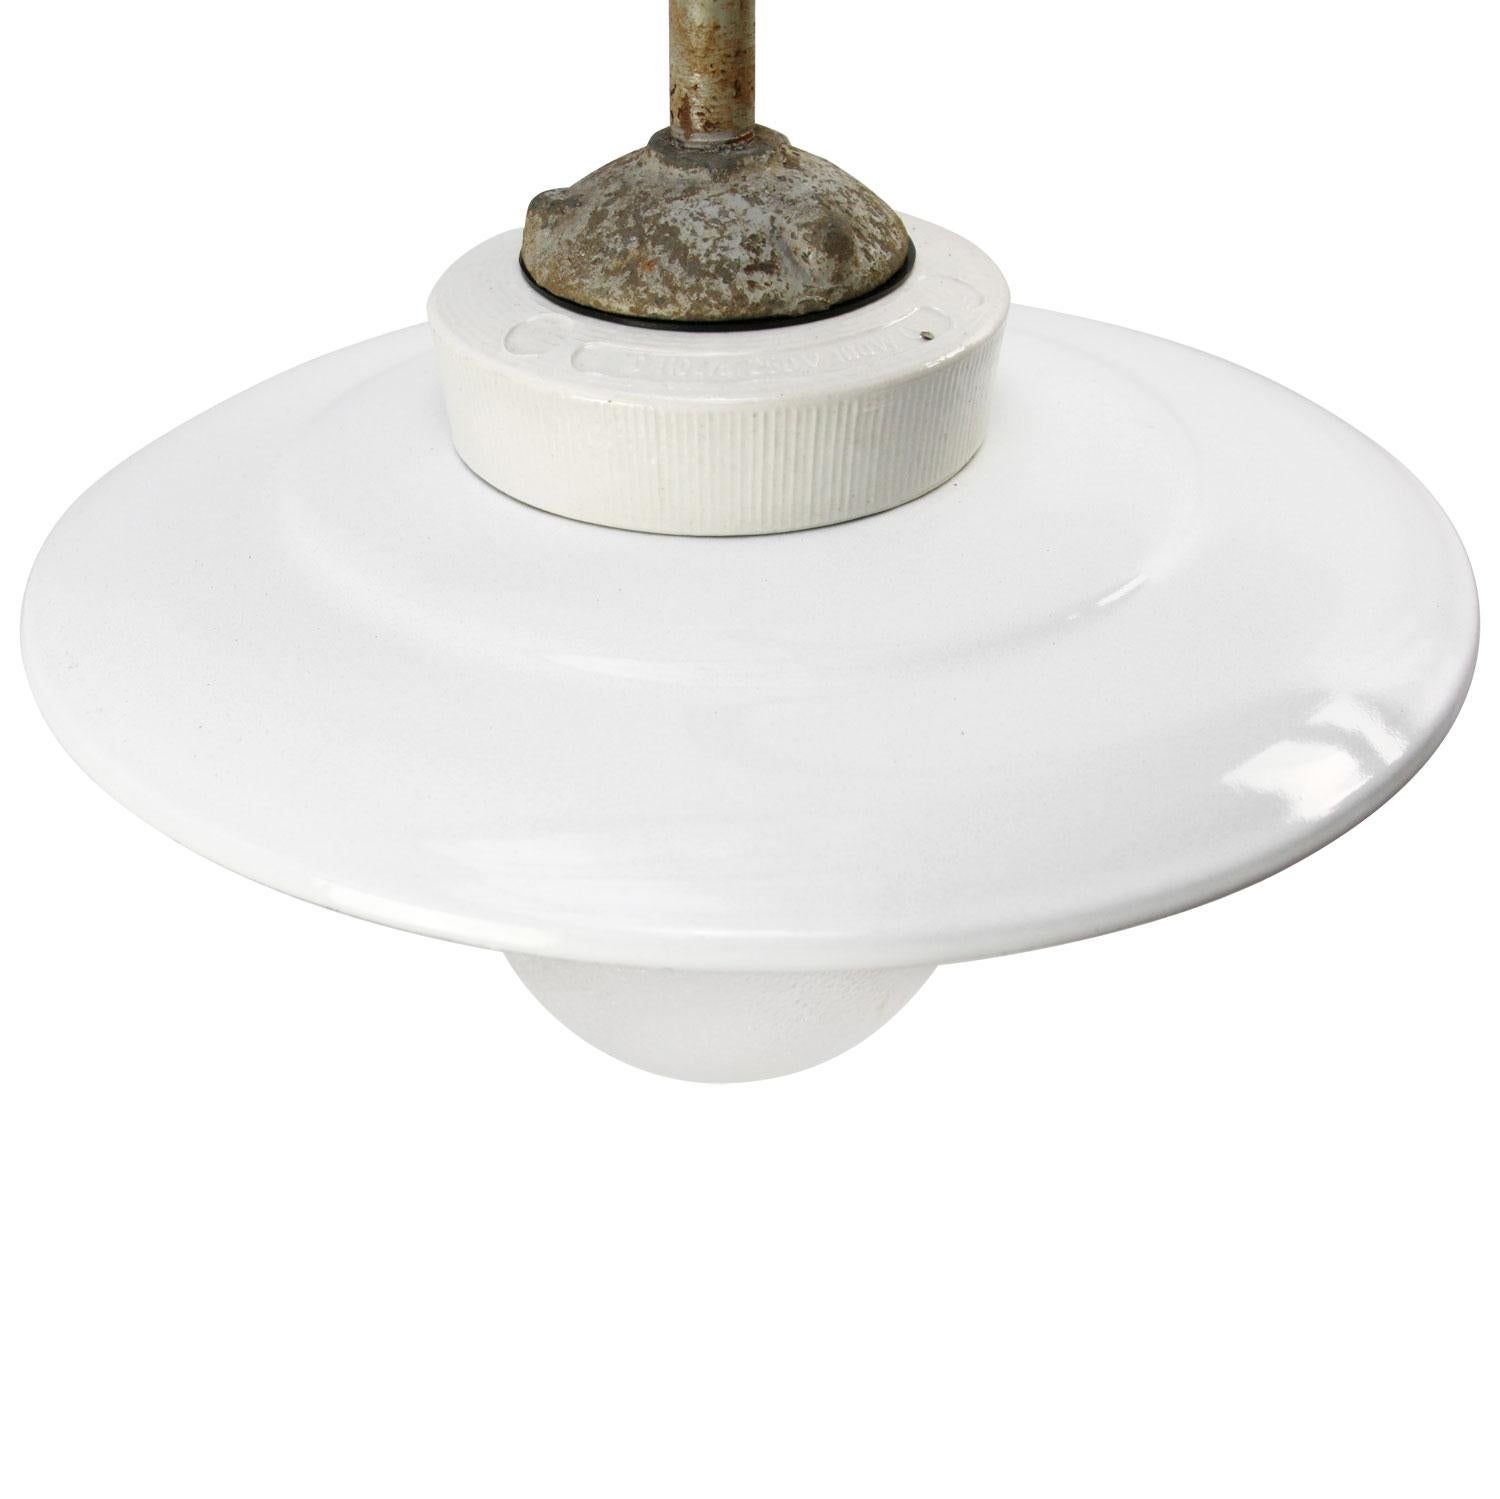 White enamel industrial wall light with white interior.
Cast iron and porcelain top, frosted glass.
Diameter cast iron wall mount: 9 cm, 3 holes to secure.

Weight: 2.10 kg / 4.6 lb

Priced per individual item. All lamps have been made